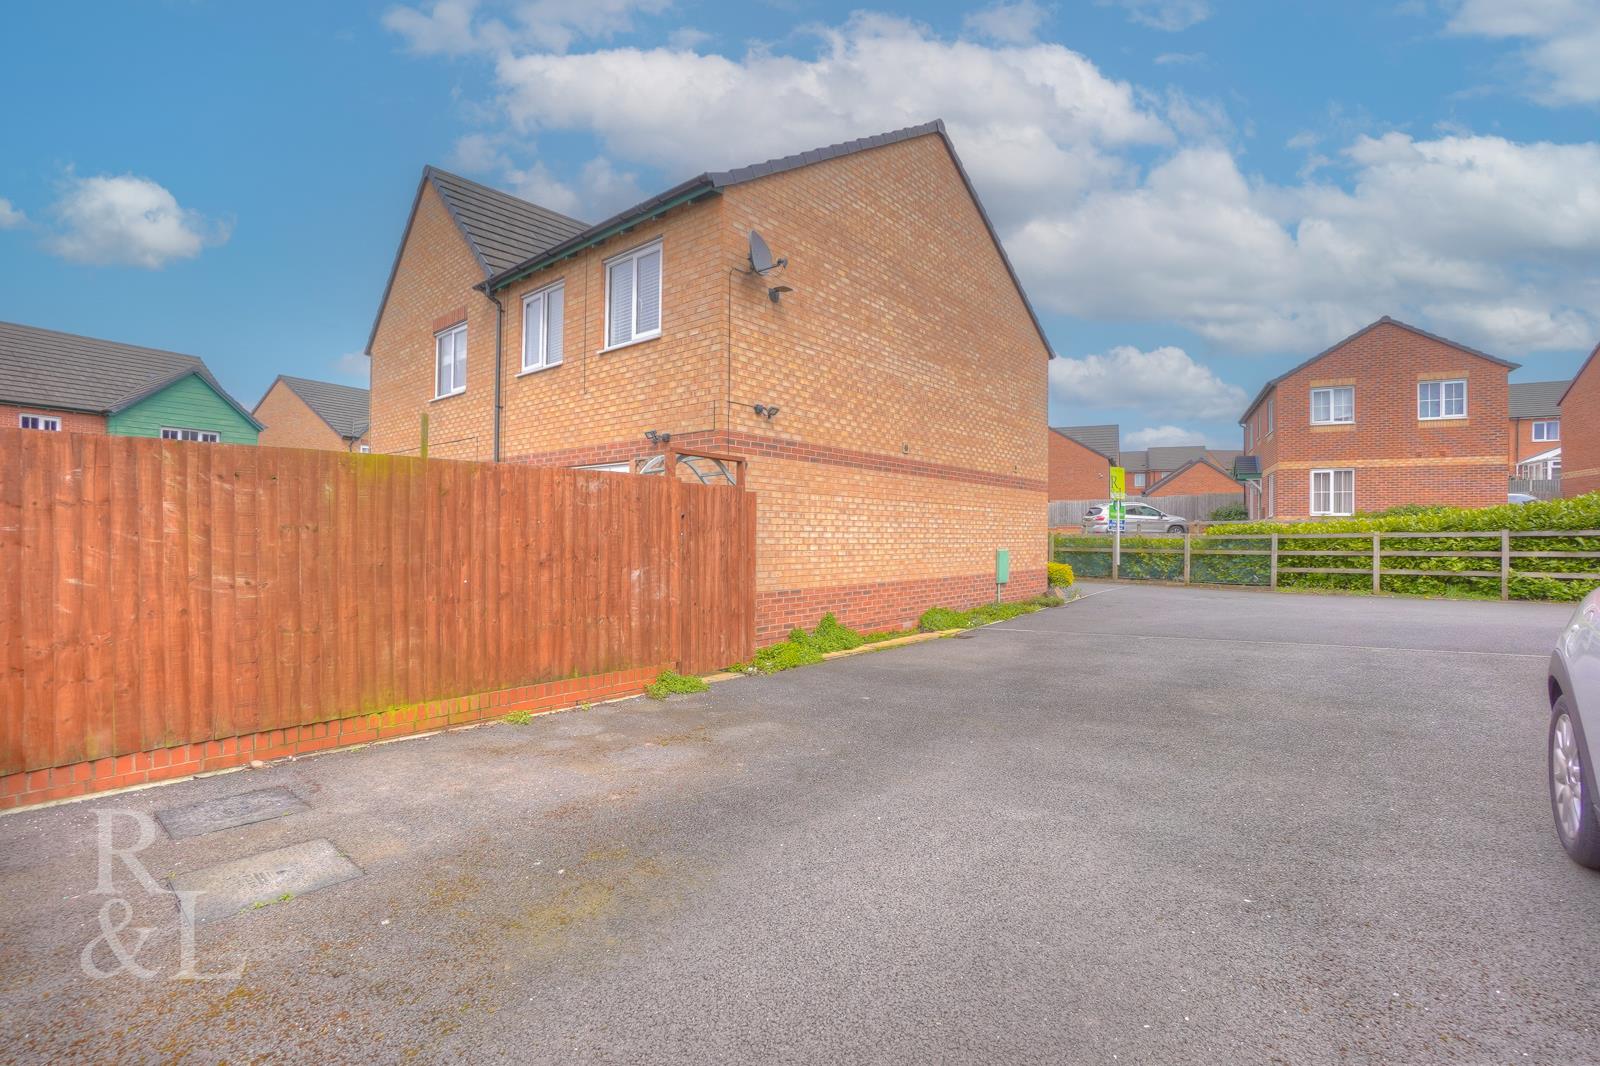 Property image for Askew Way, Woodville